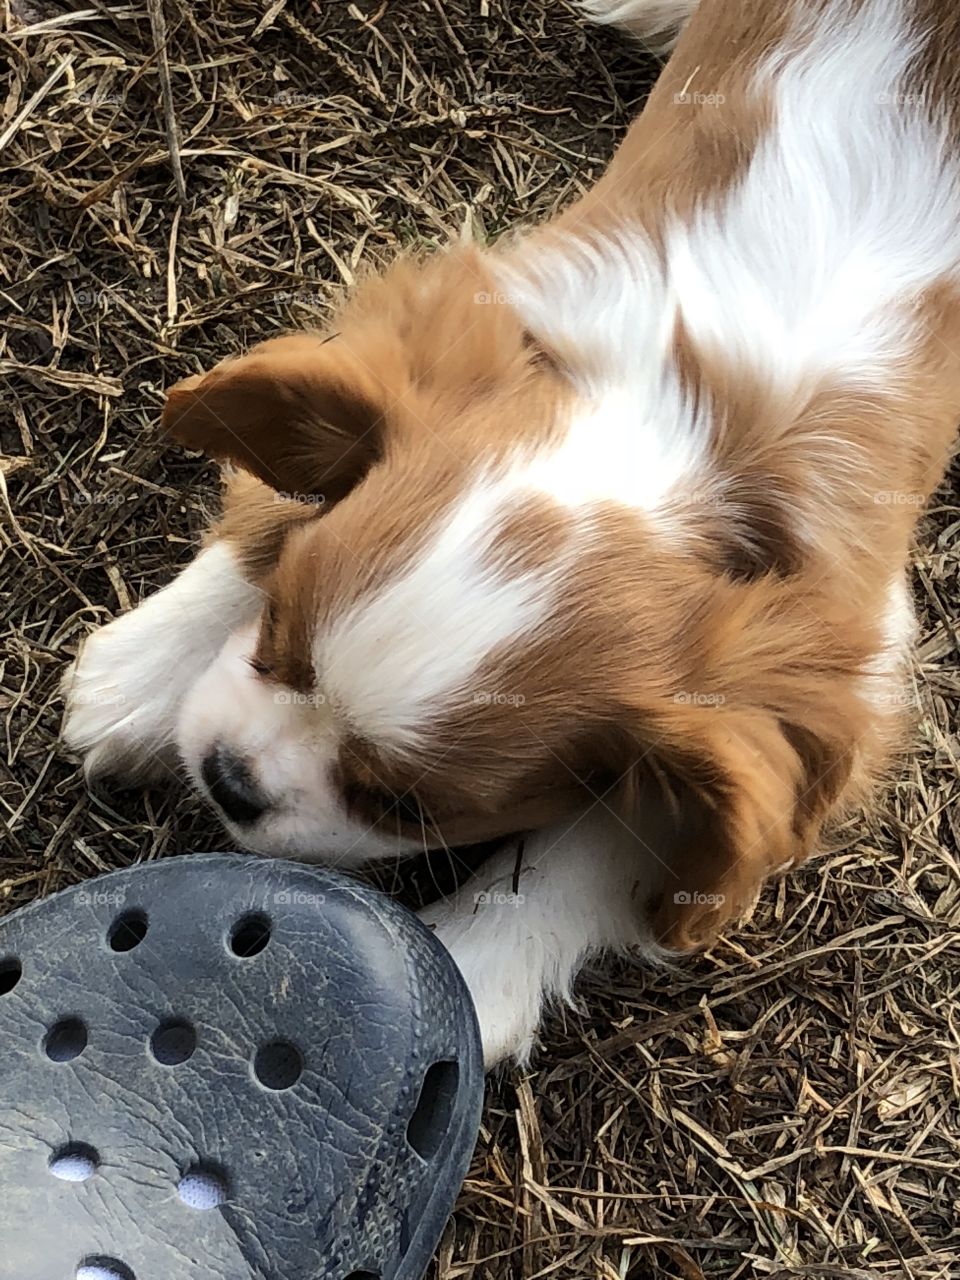 Lucy trying to chew the crocks